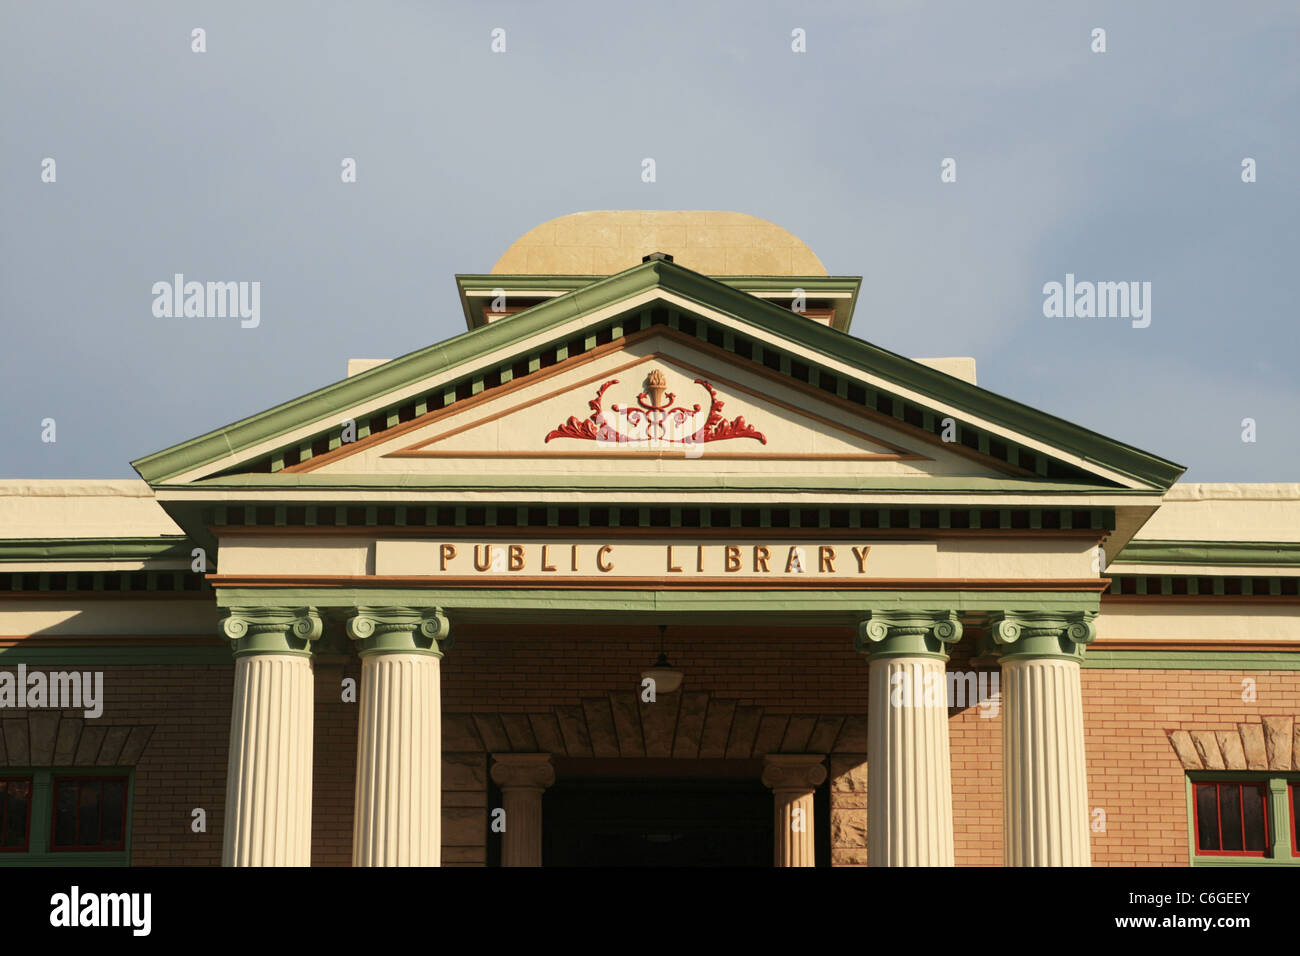 old public library front with classical architecture Stock Photo